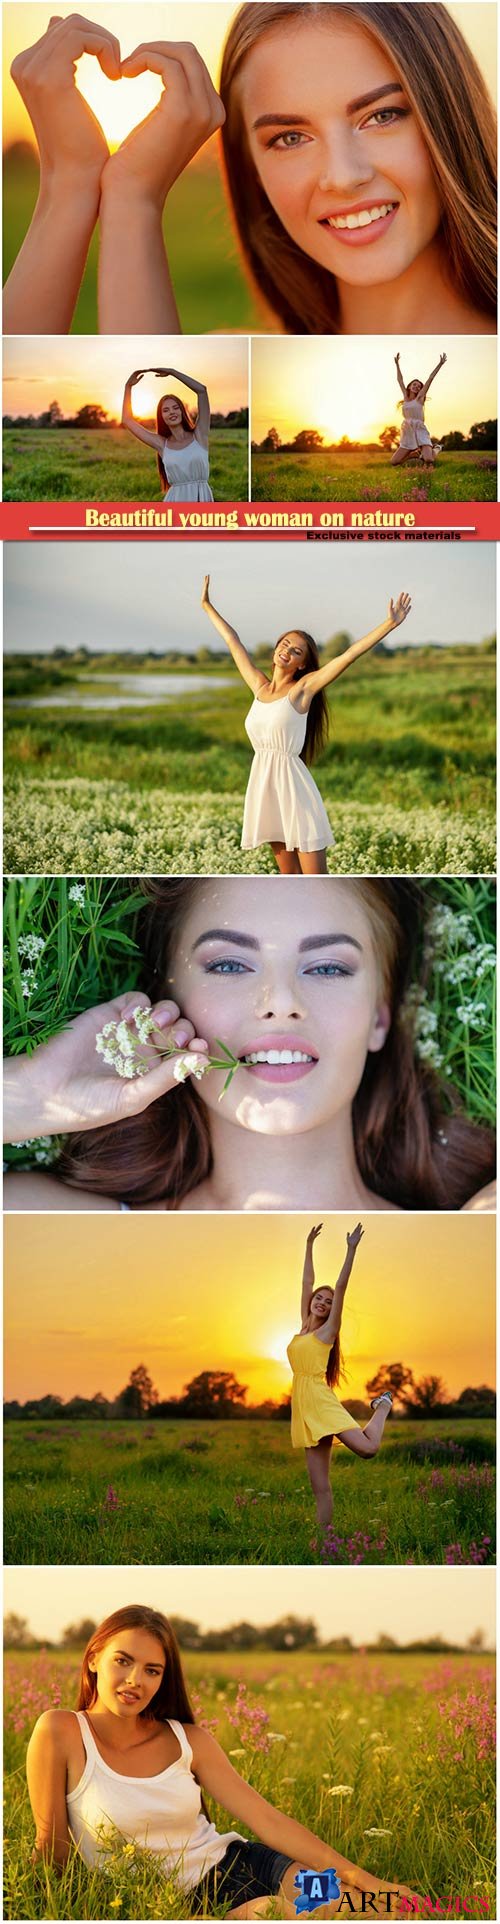 Beautiful young woman on nature over field background